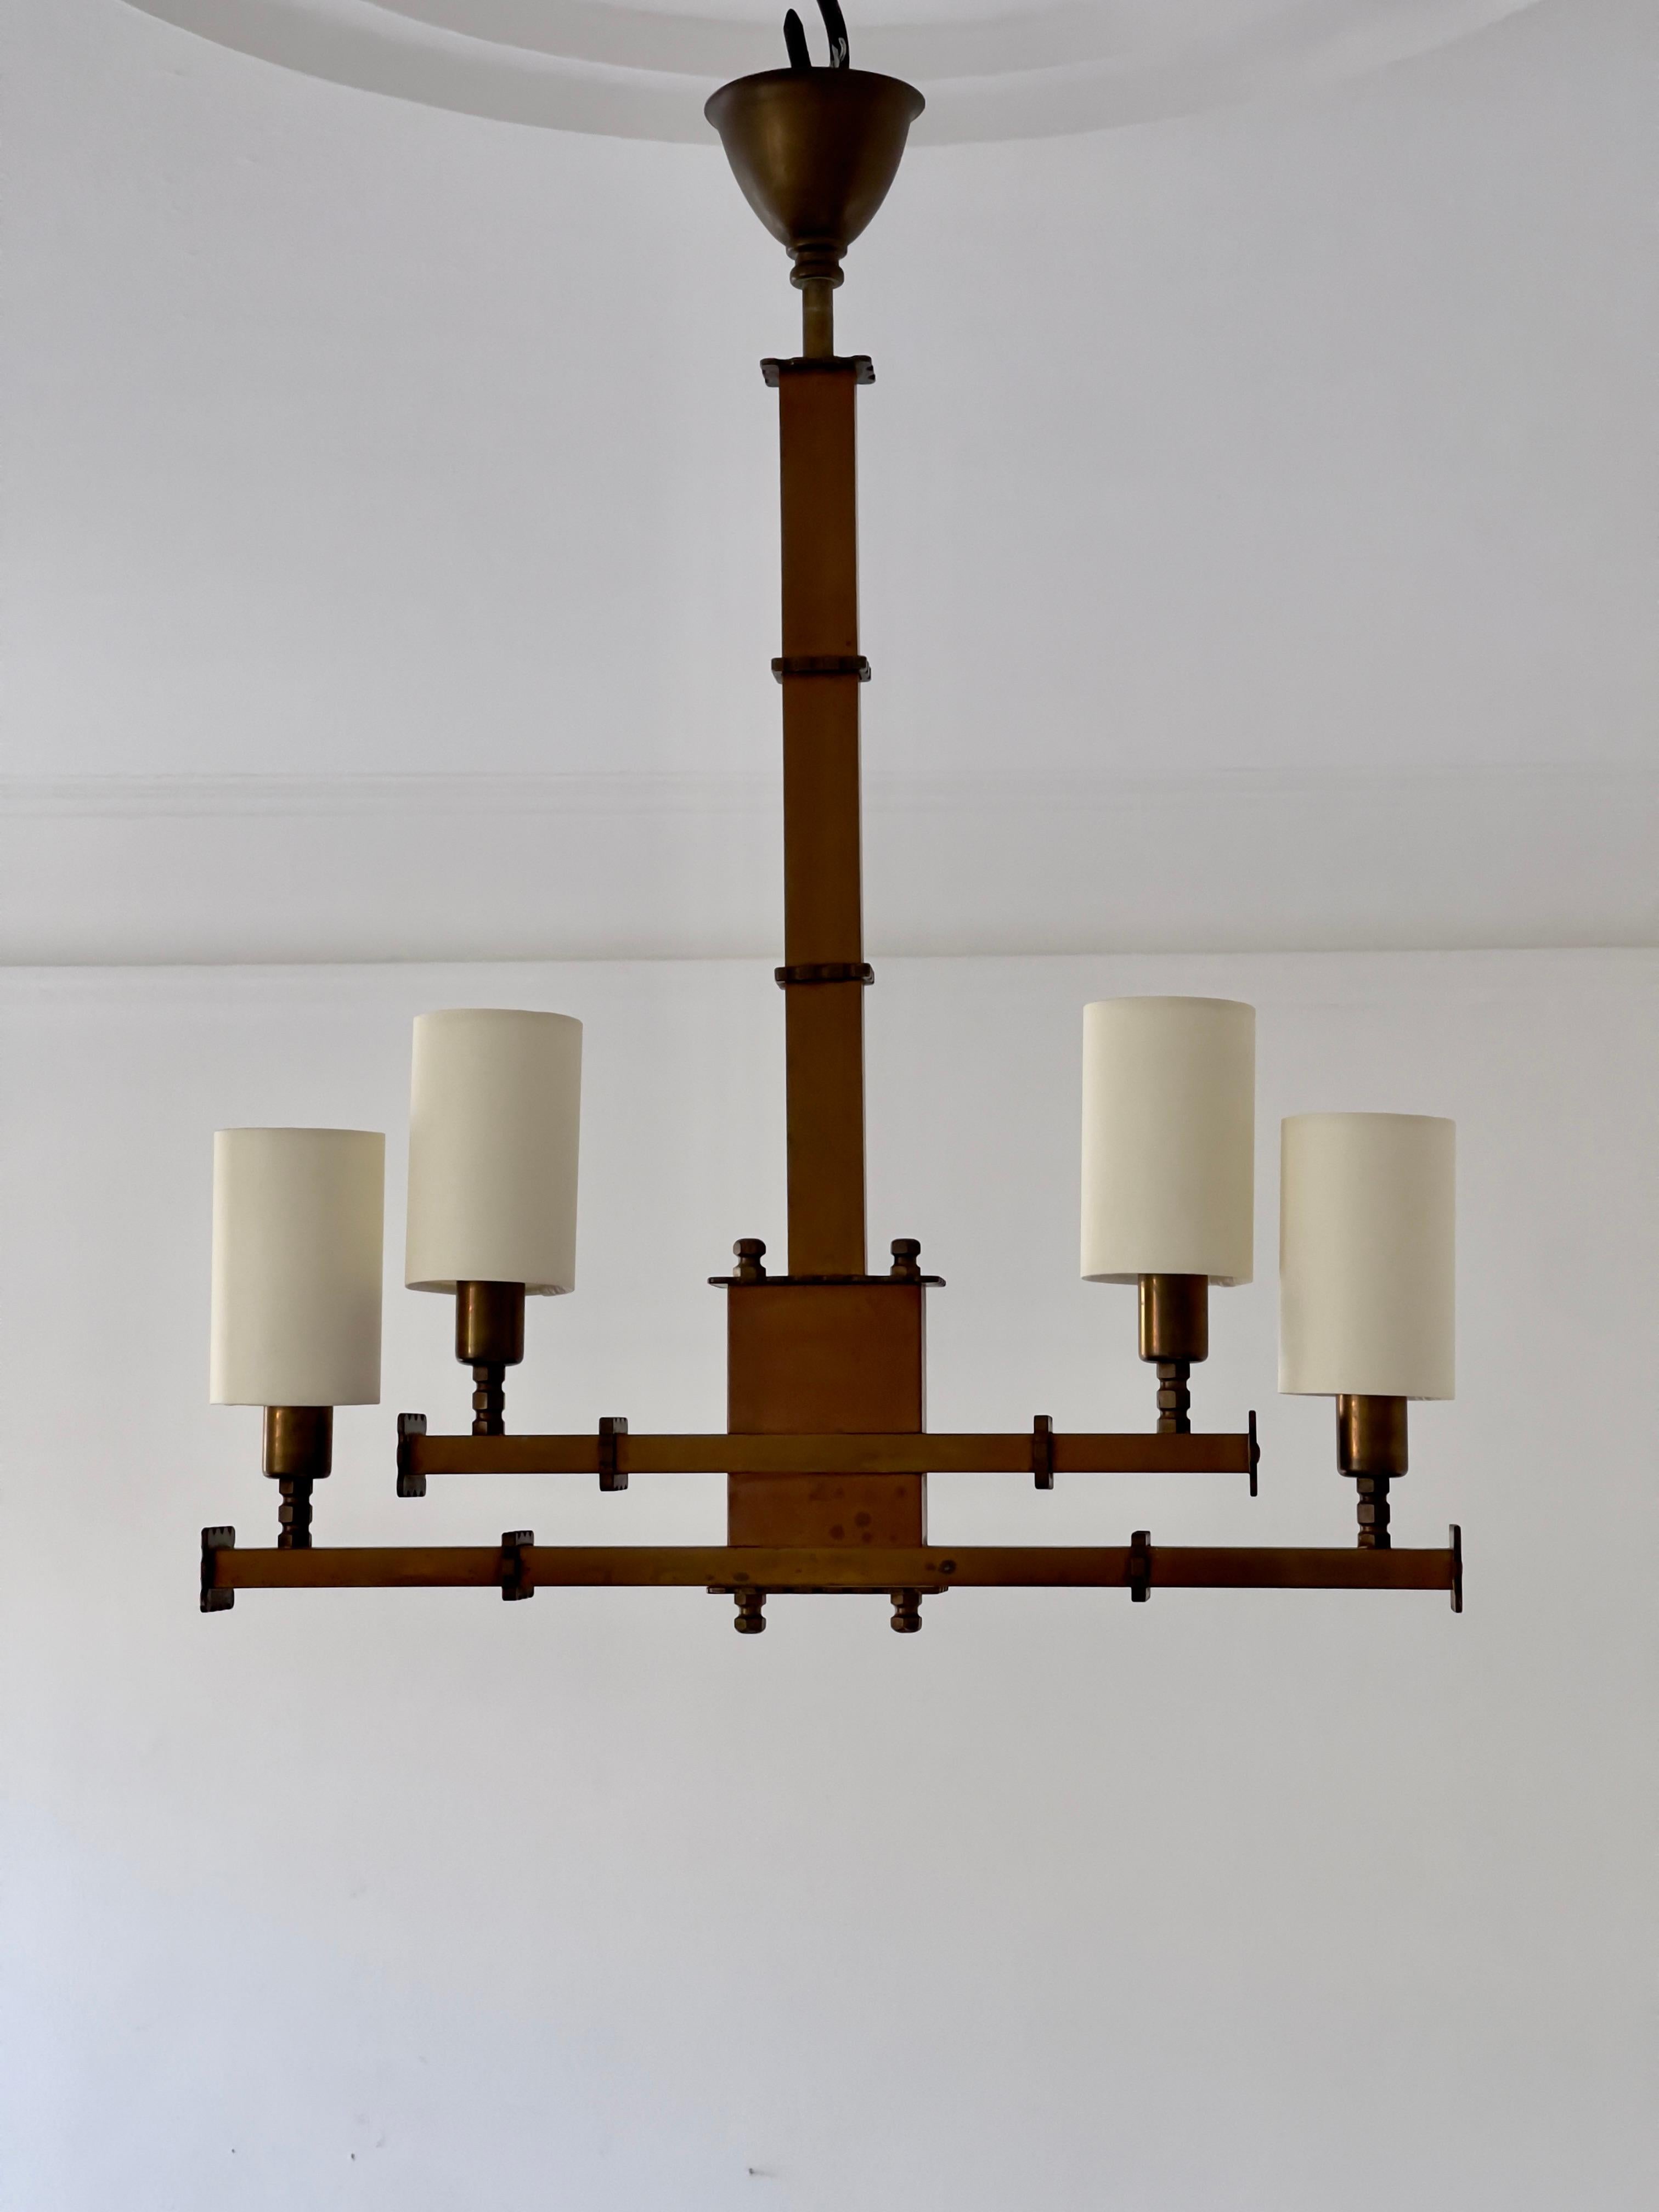 Rare 20th century french Art Deco chandelier in beautiful patinated brass and new original reconstructed shades of raw silk. The solid brass construction and rhythmic structures speaks the language of brutalism and also resonates the architectural